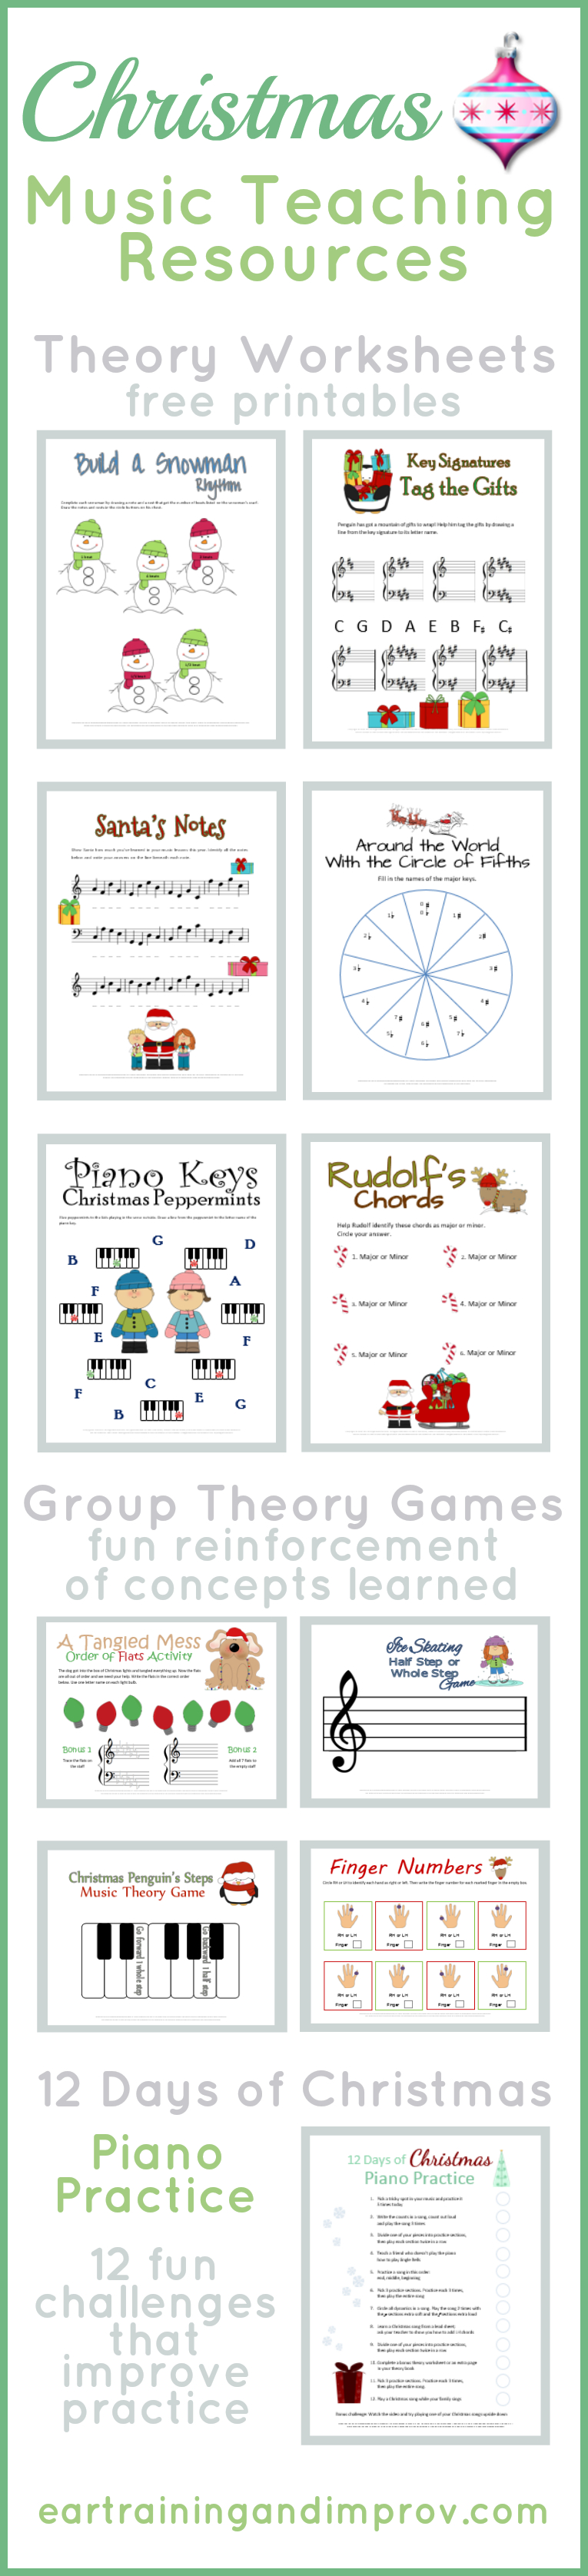 Christmas Music Theory Worksheets - 20+ Free Printables | Printable Theory Worksheets